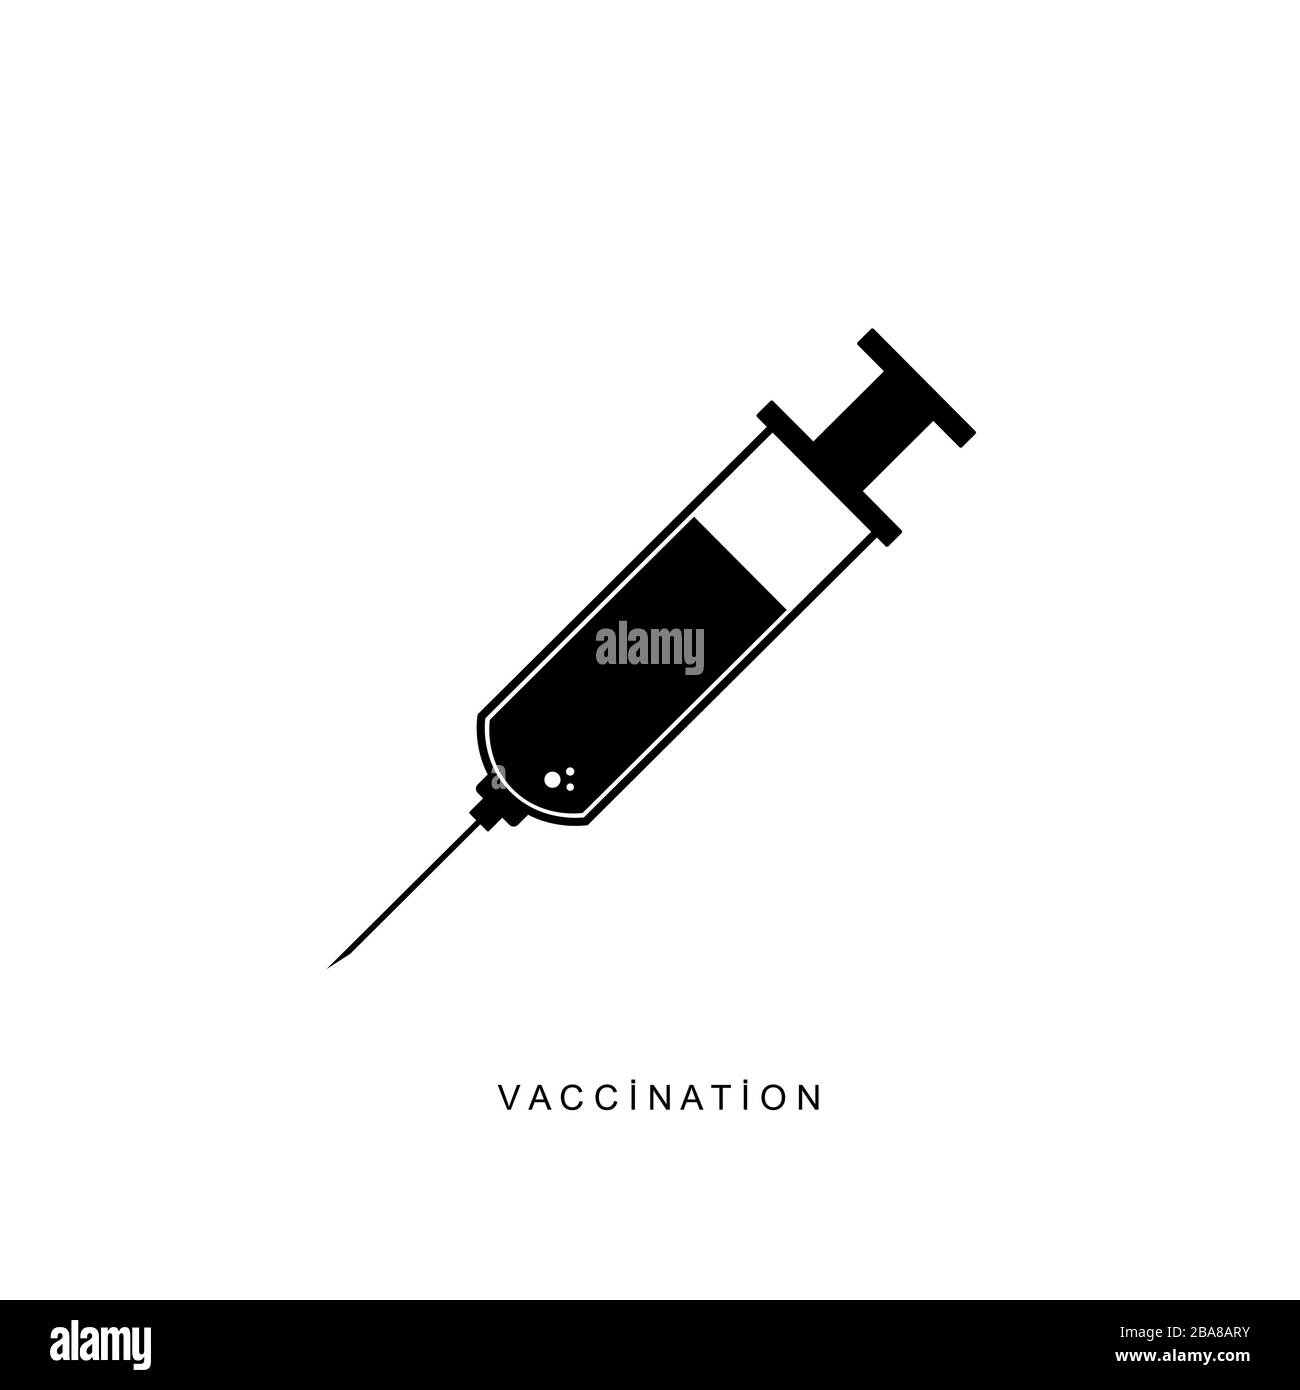 Syringe icon with flat style. Vaccine, medical, epidemic disease concept, isolated vector illustration Stock Vector